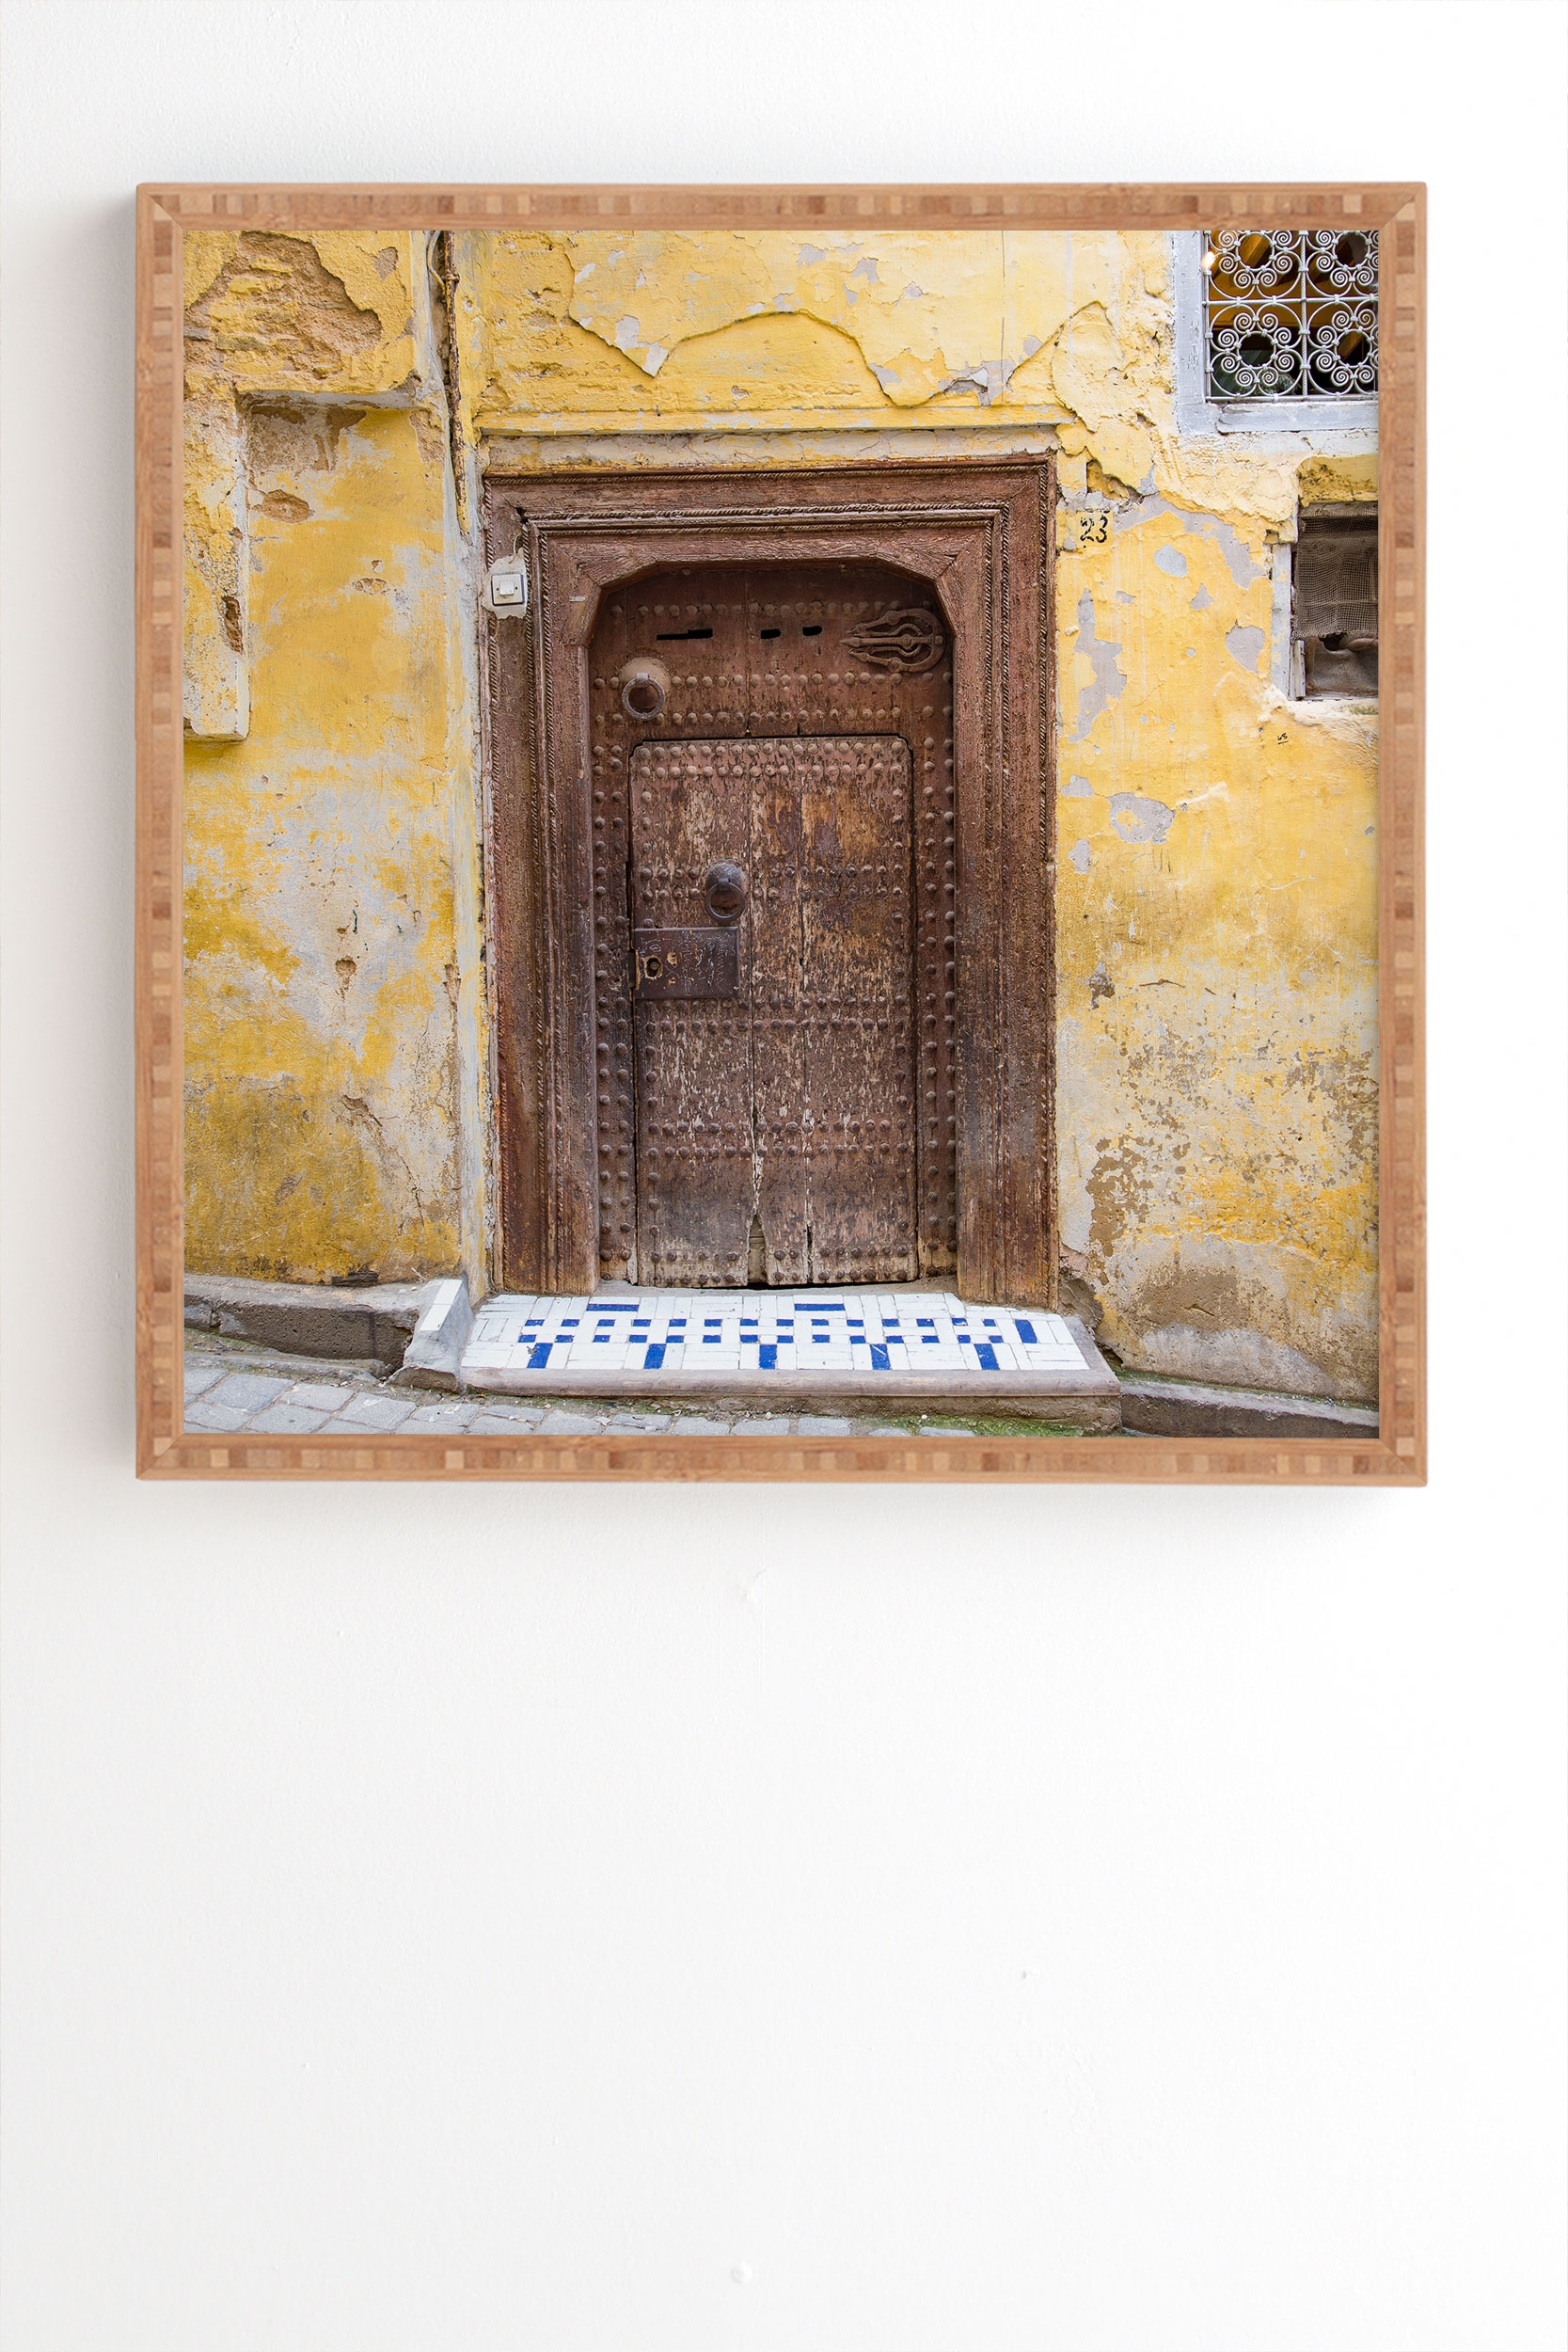 Fes Number 23 by TRVLR Designs - Framed Wall Art Bamboo 30" x 30" - Image 1